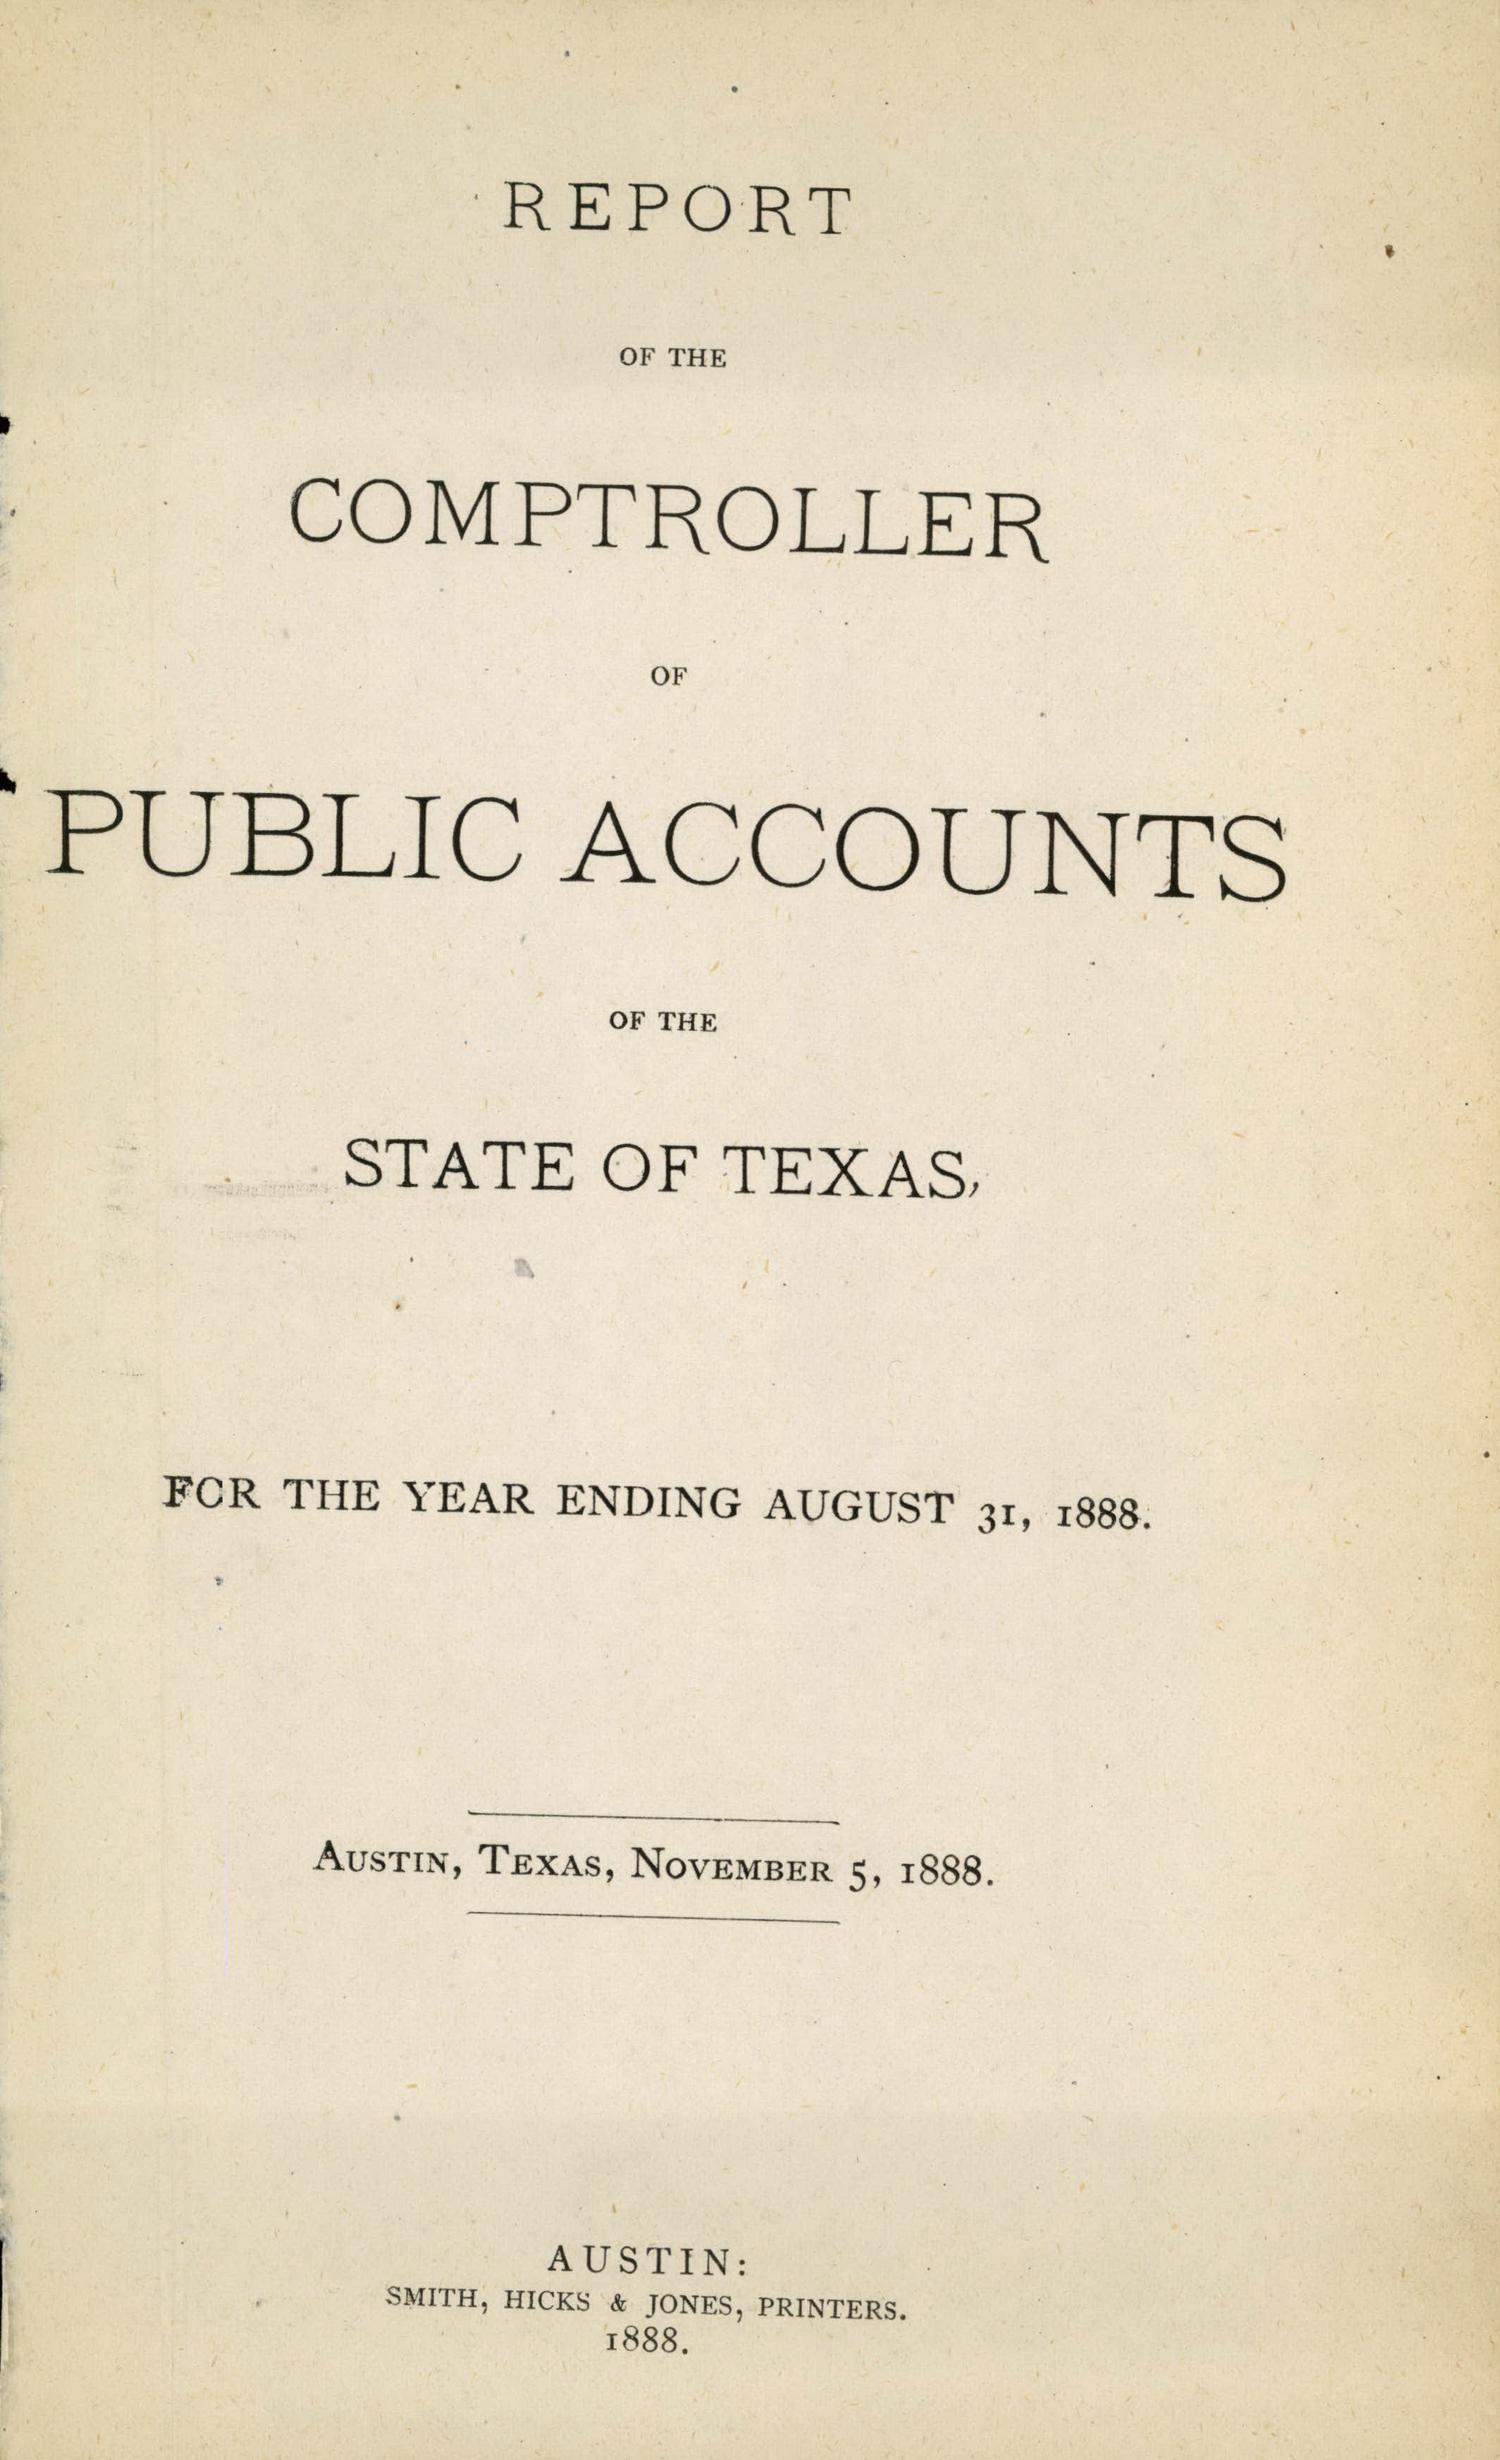 Report of the Comptroller of Public Accounts of the State of Texas: 1888
                                                
                                                    TITLE PAGE
                                                